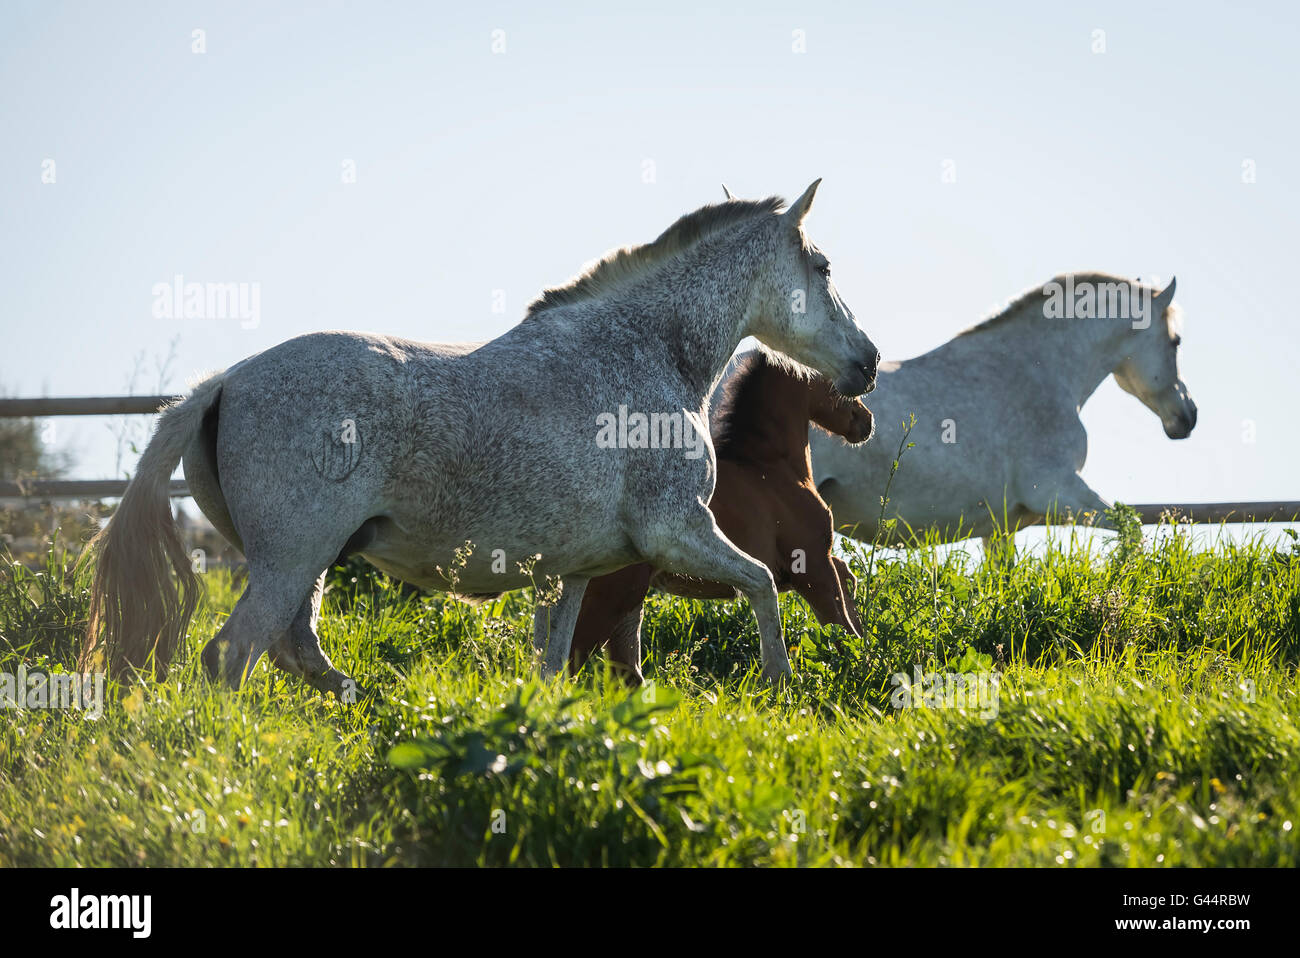 Herd of PRE mares and foals in a field Stock Photo